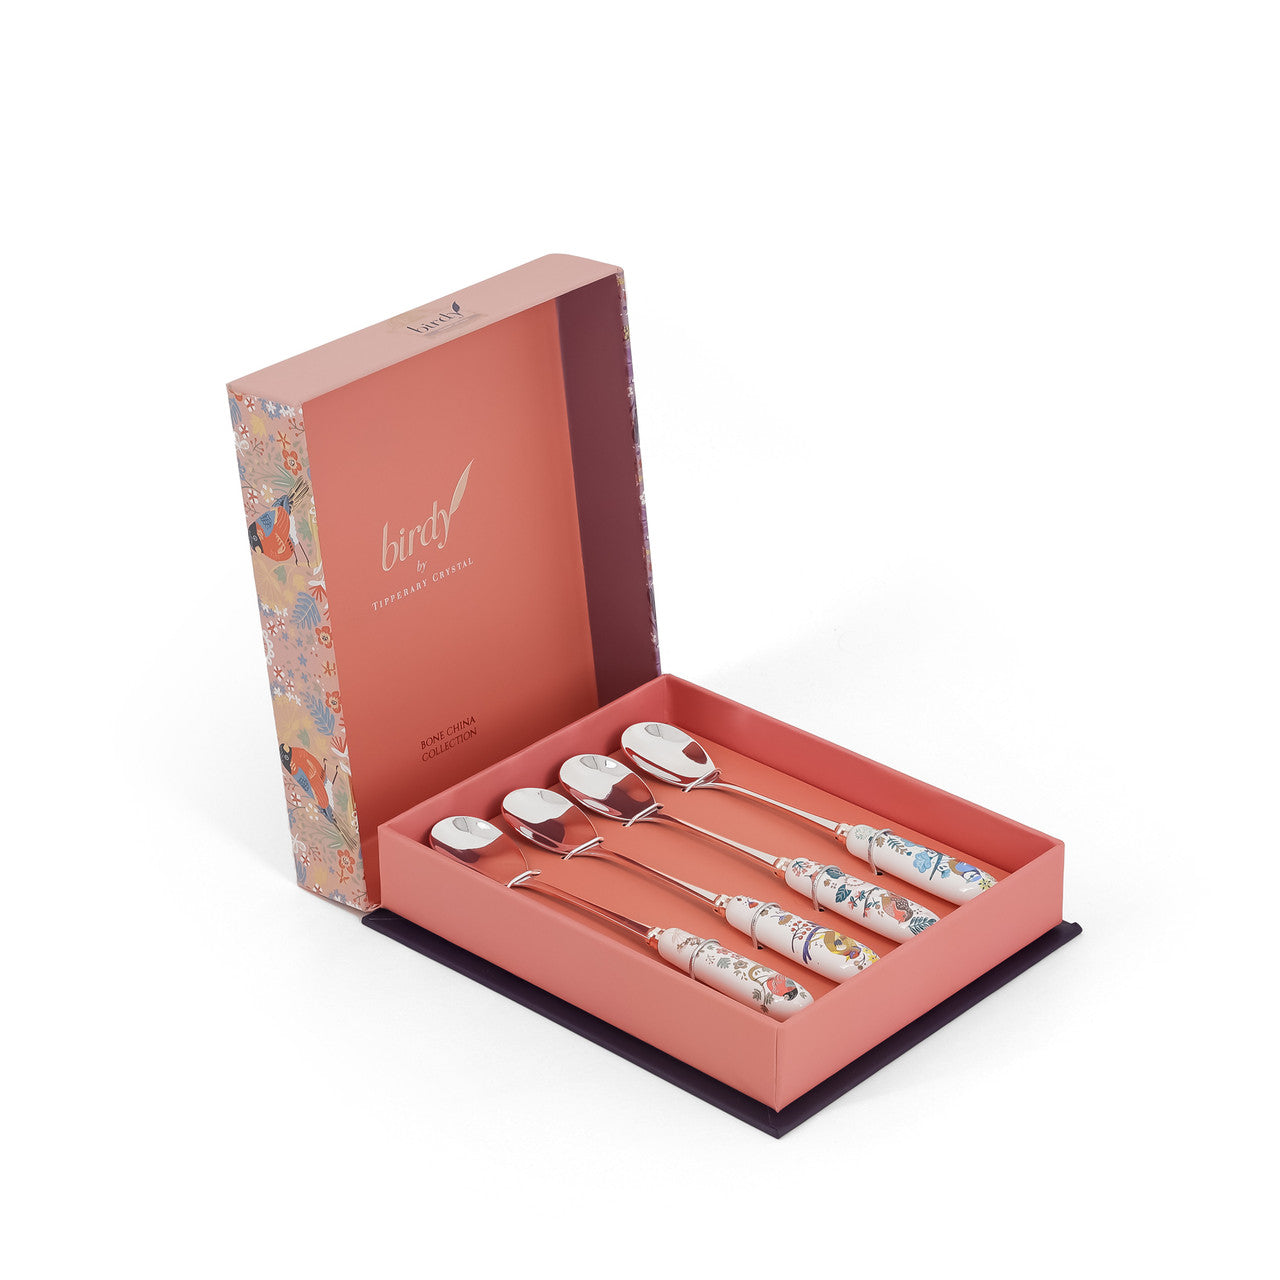 Tipperary Crystal Birdy Dessert Spoons - New 2022  New to our collection, these birdy desert spoons come beautifully illustrated and presented in a rigid Tipperary Crystal gift box. Makes a wonderful gift to be enjoyed.  The Birdy Collection is a series of 6 exclusively commissioned illustrations inspired by native Irish birds; Bullfinch, Goldfinch, Blue tit, Greenfinch, Kingfisher and Robin.